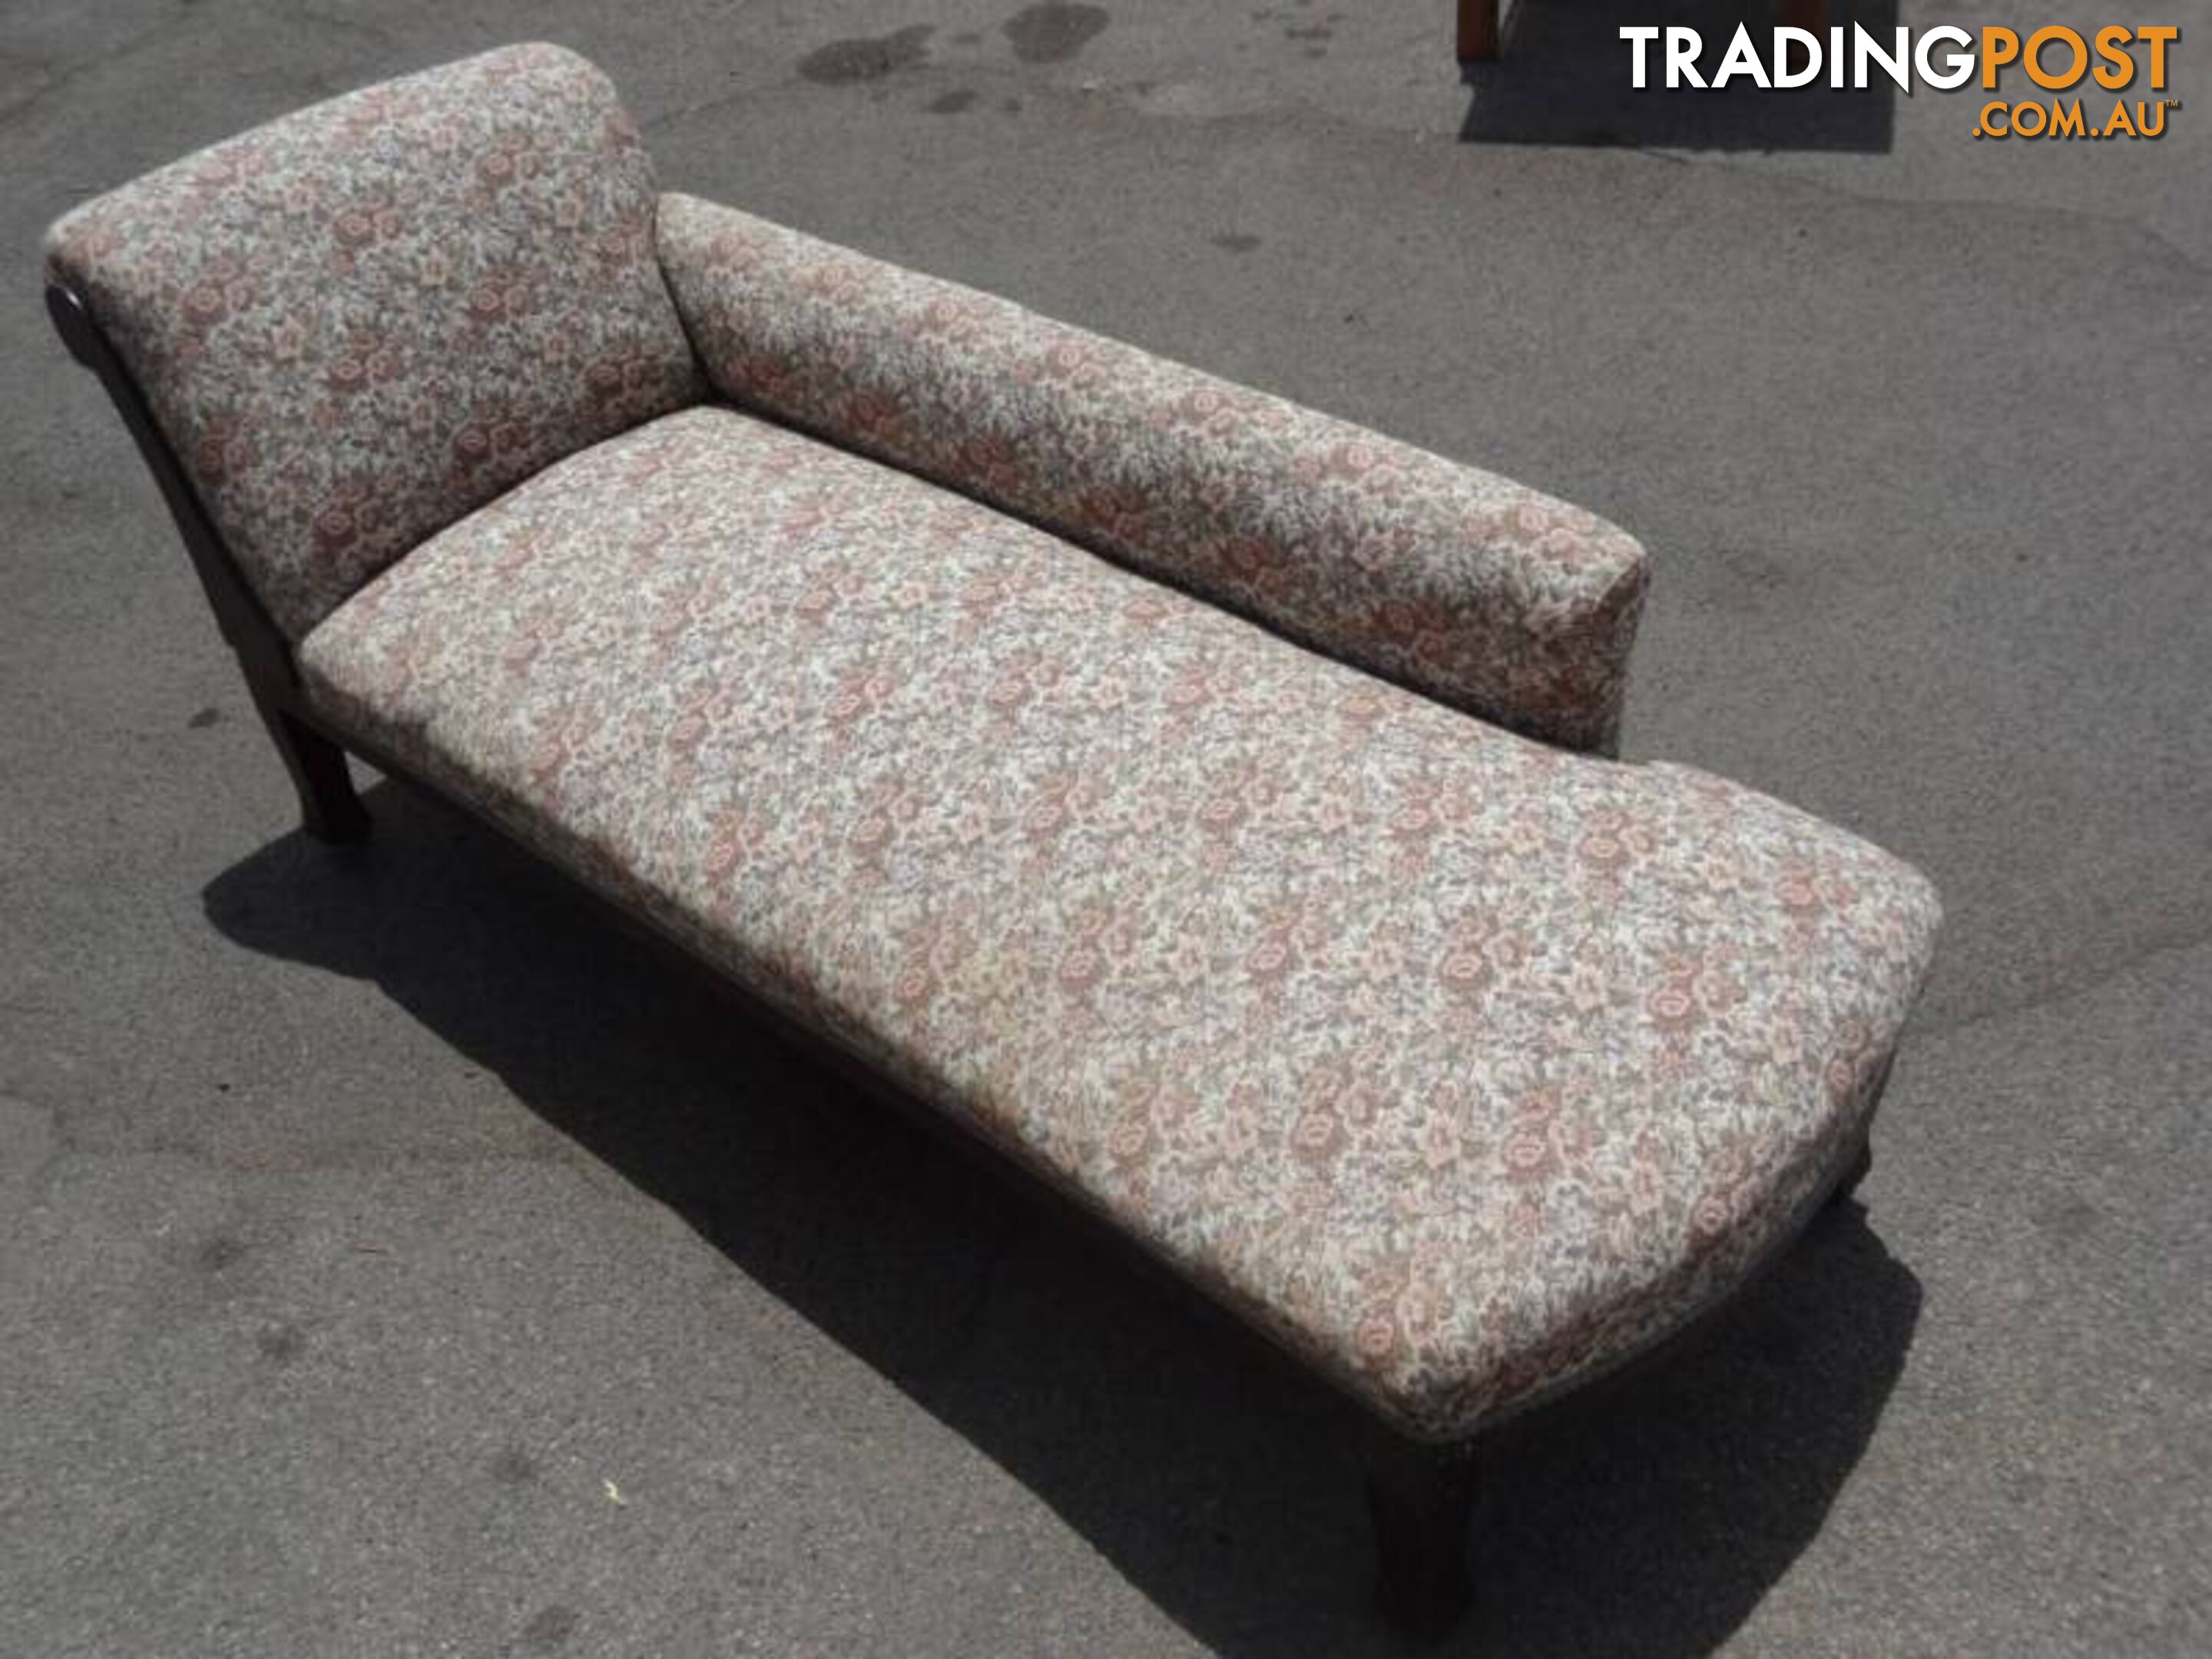 Vintage 1950's Chaise Lounge & Matching Fabric/Vinyl Armchairs